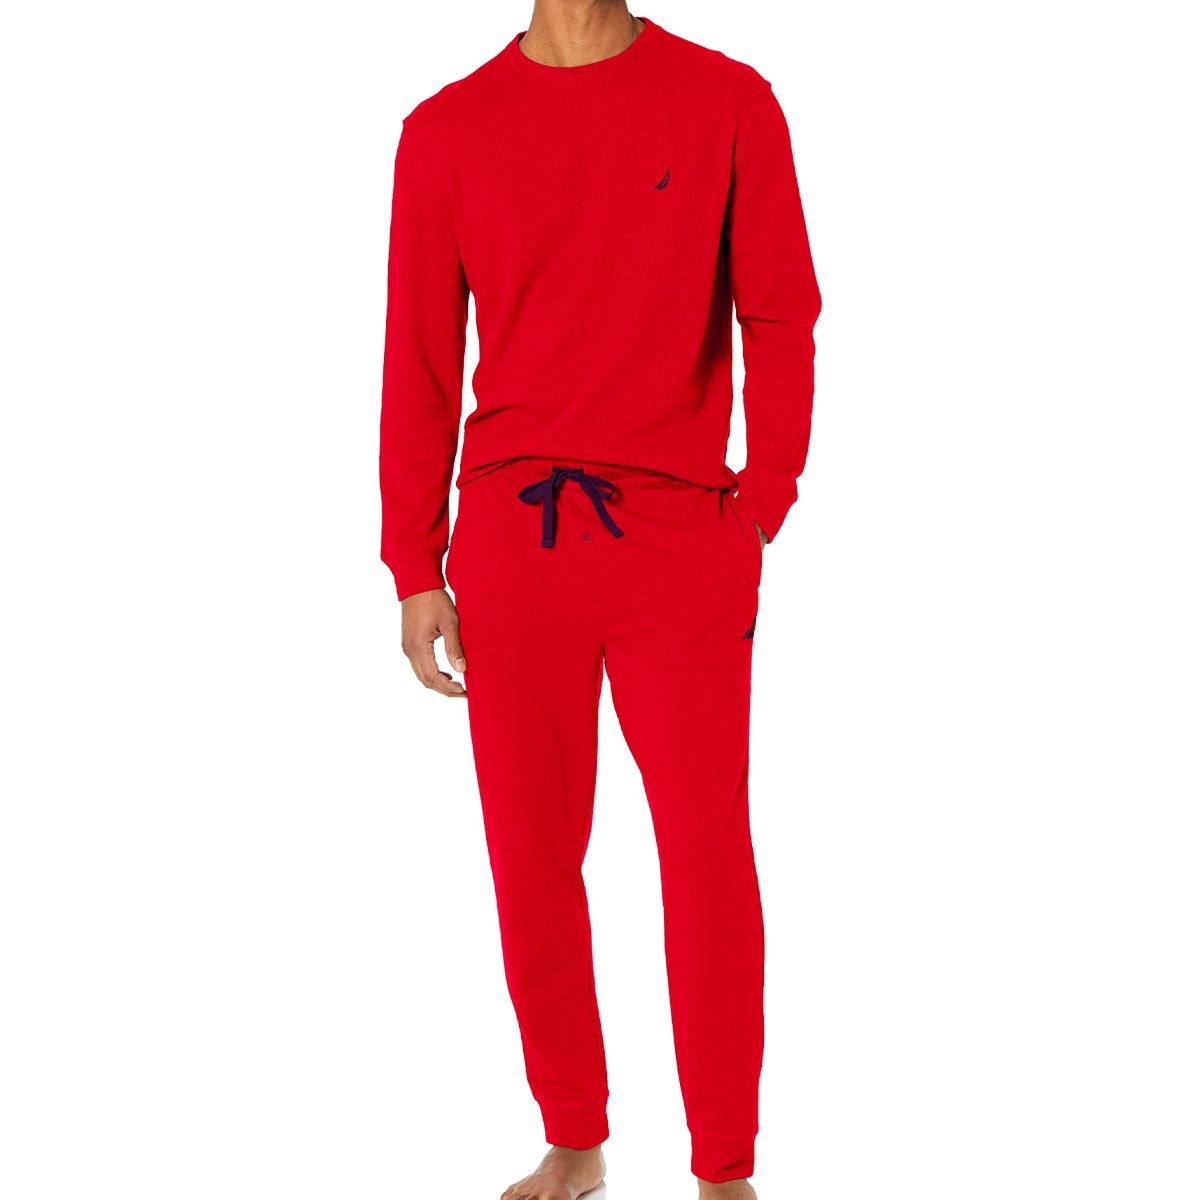 15 Best Men's Pajamas in 2023, Tested and Reviewed by Editors